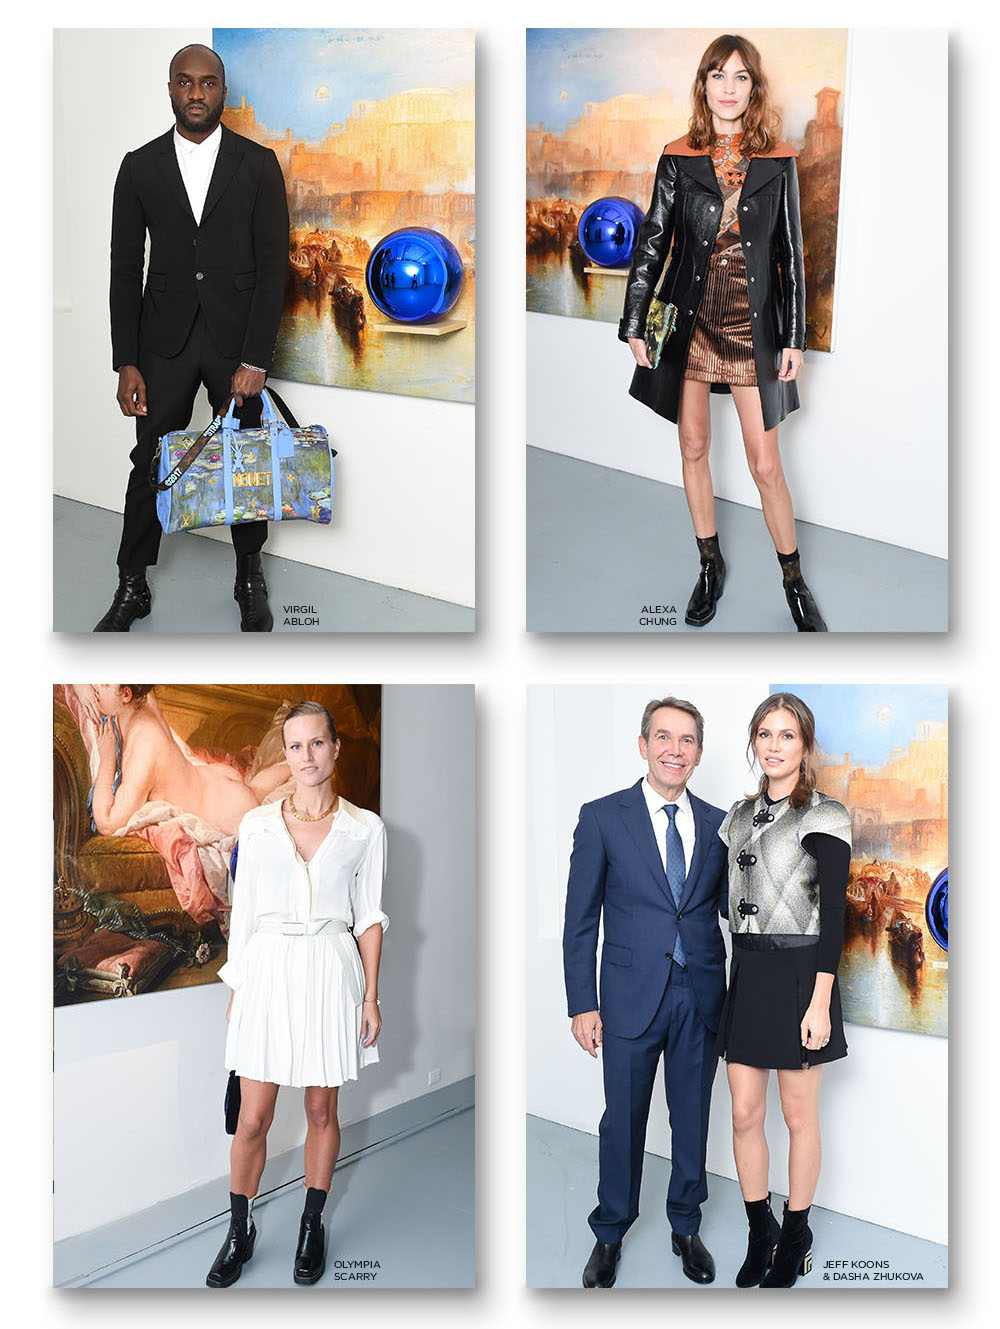 Stars Gather for Launch of Louis Vuitton Collaboration With Jeff